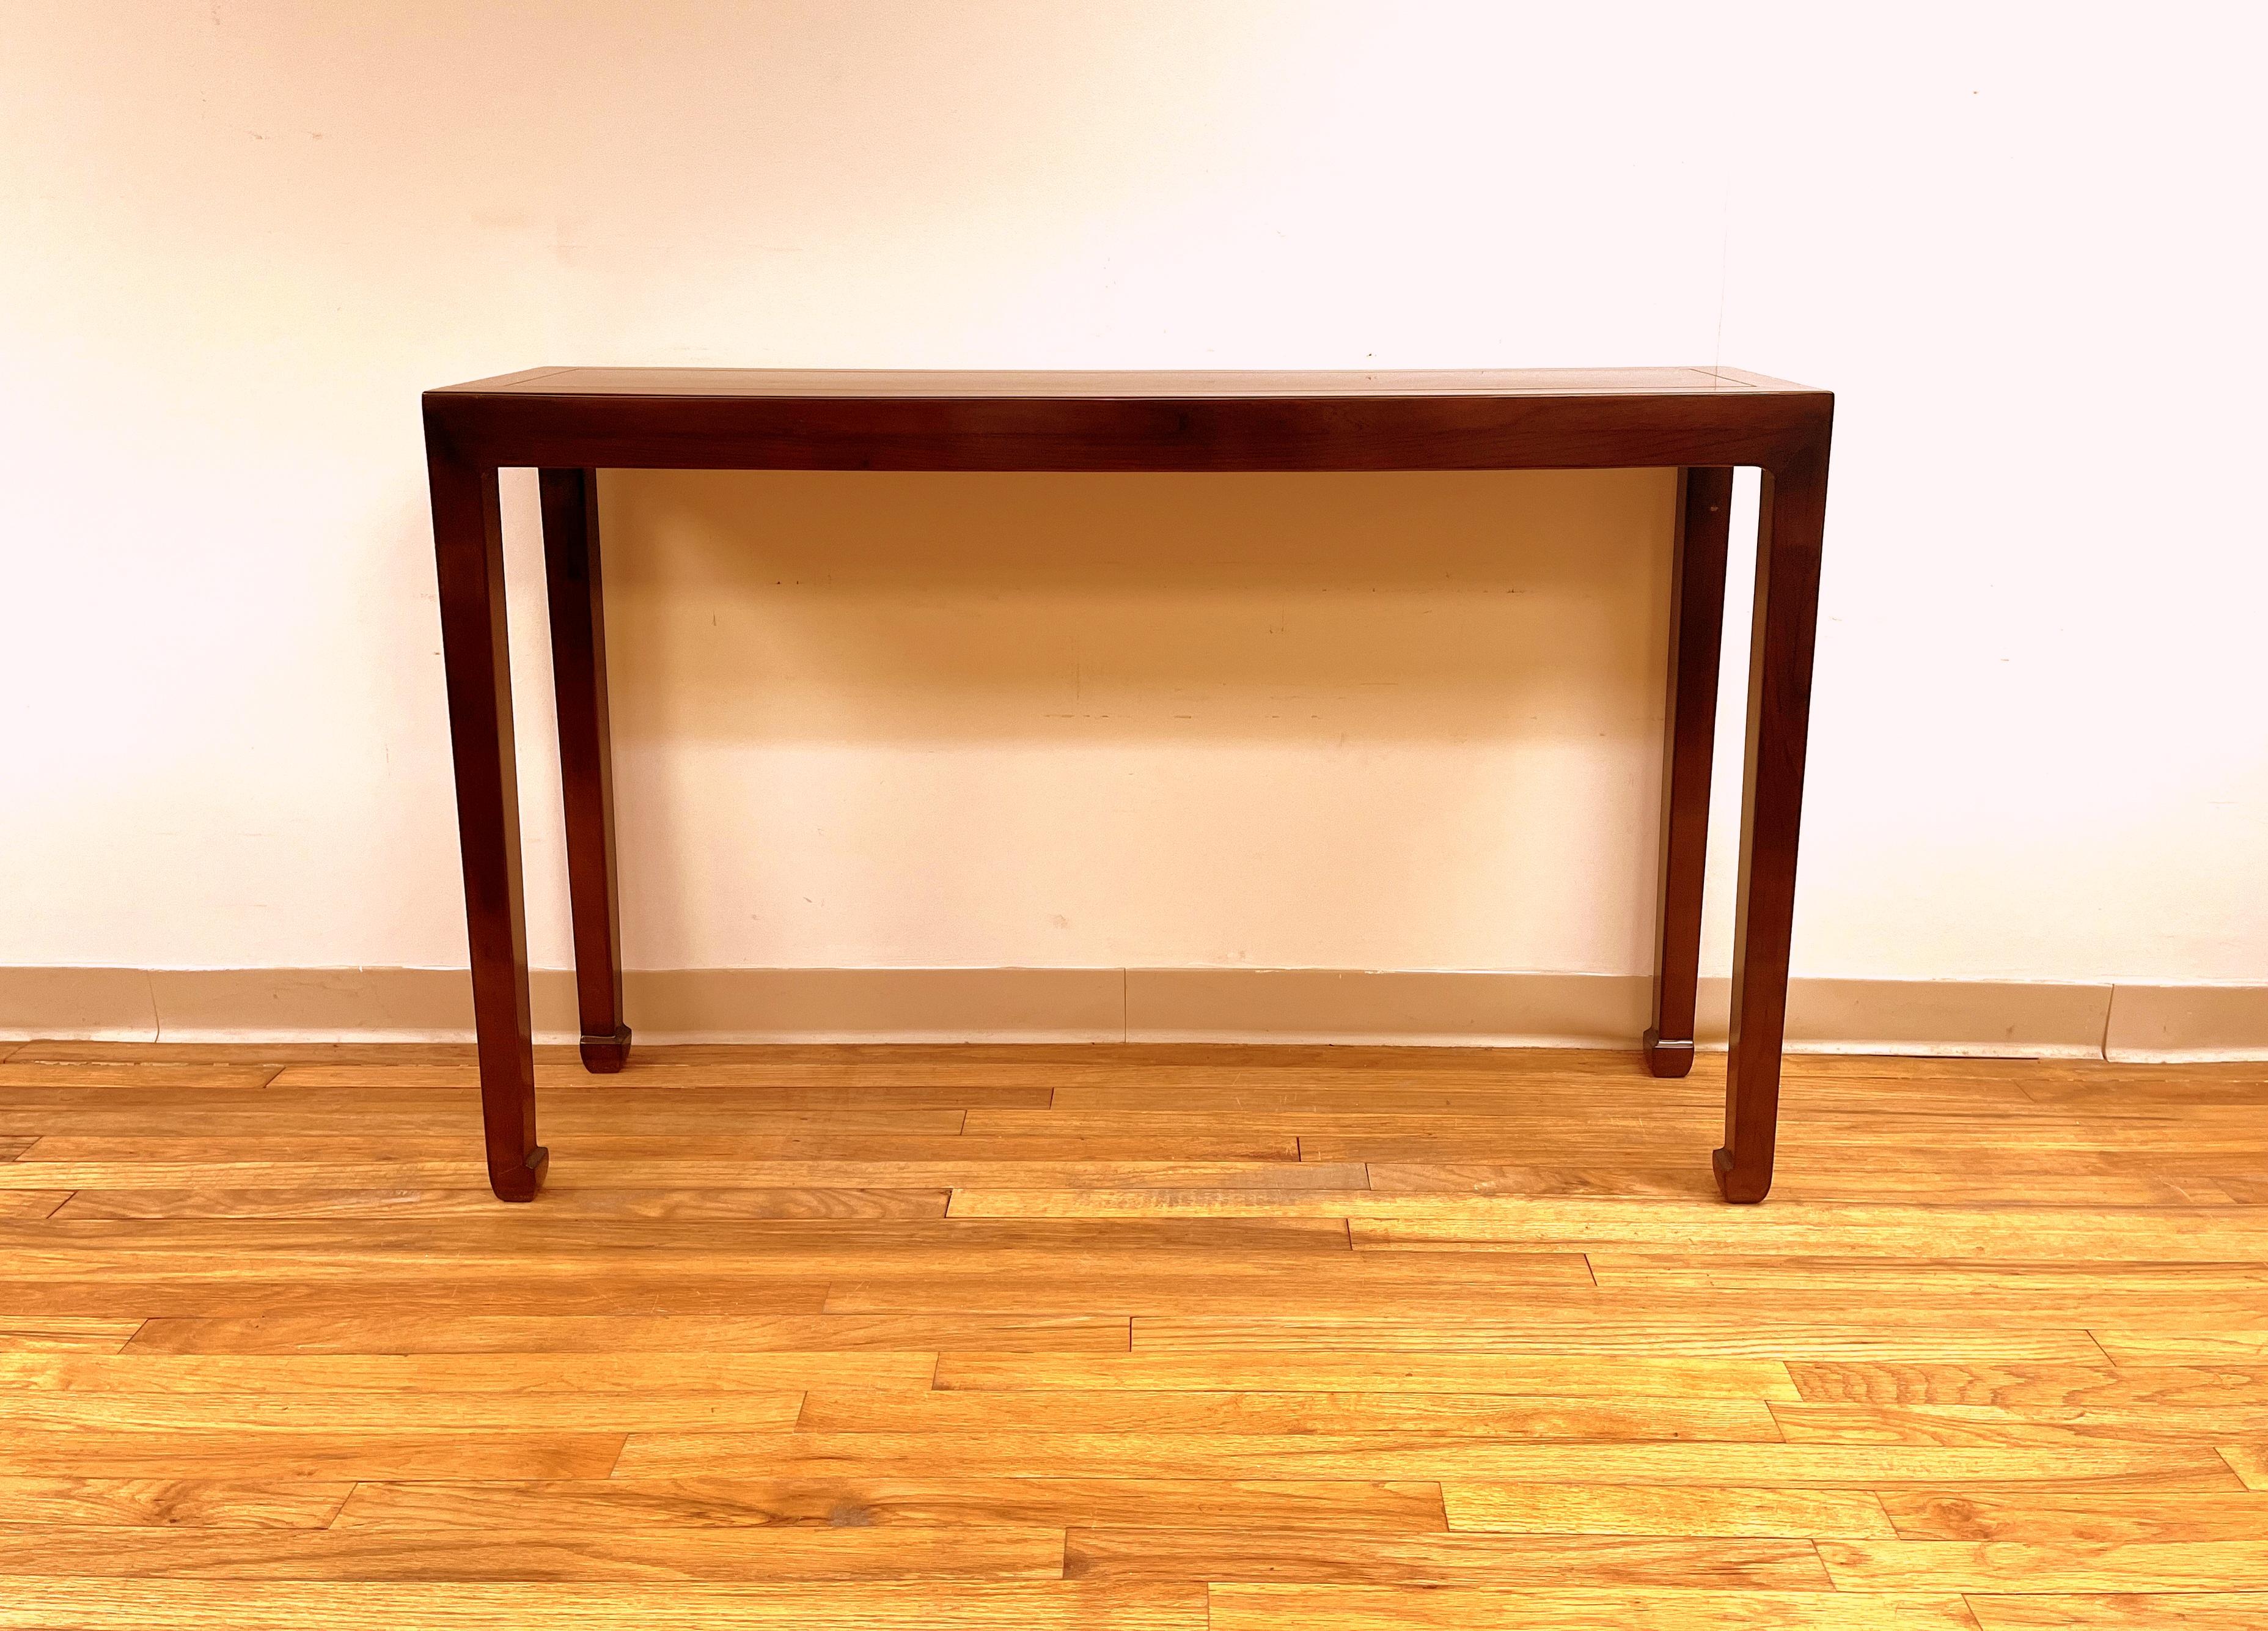 A simple and  elegant fine jumu wood console table, simple plain apron with four straight legs.
We carry fine quality furniture with elegant finished and has been appeared many times in 